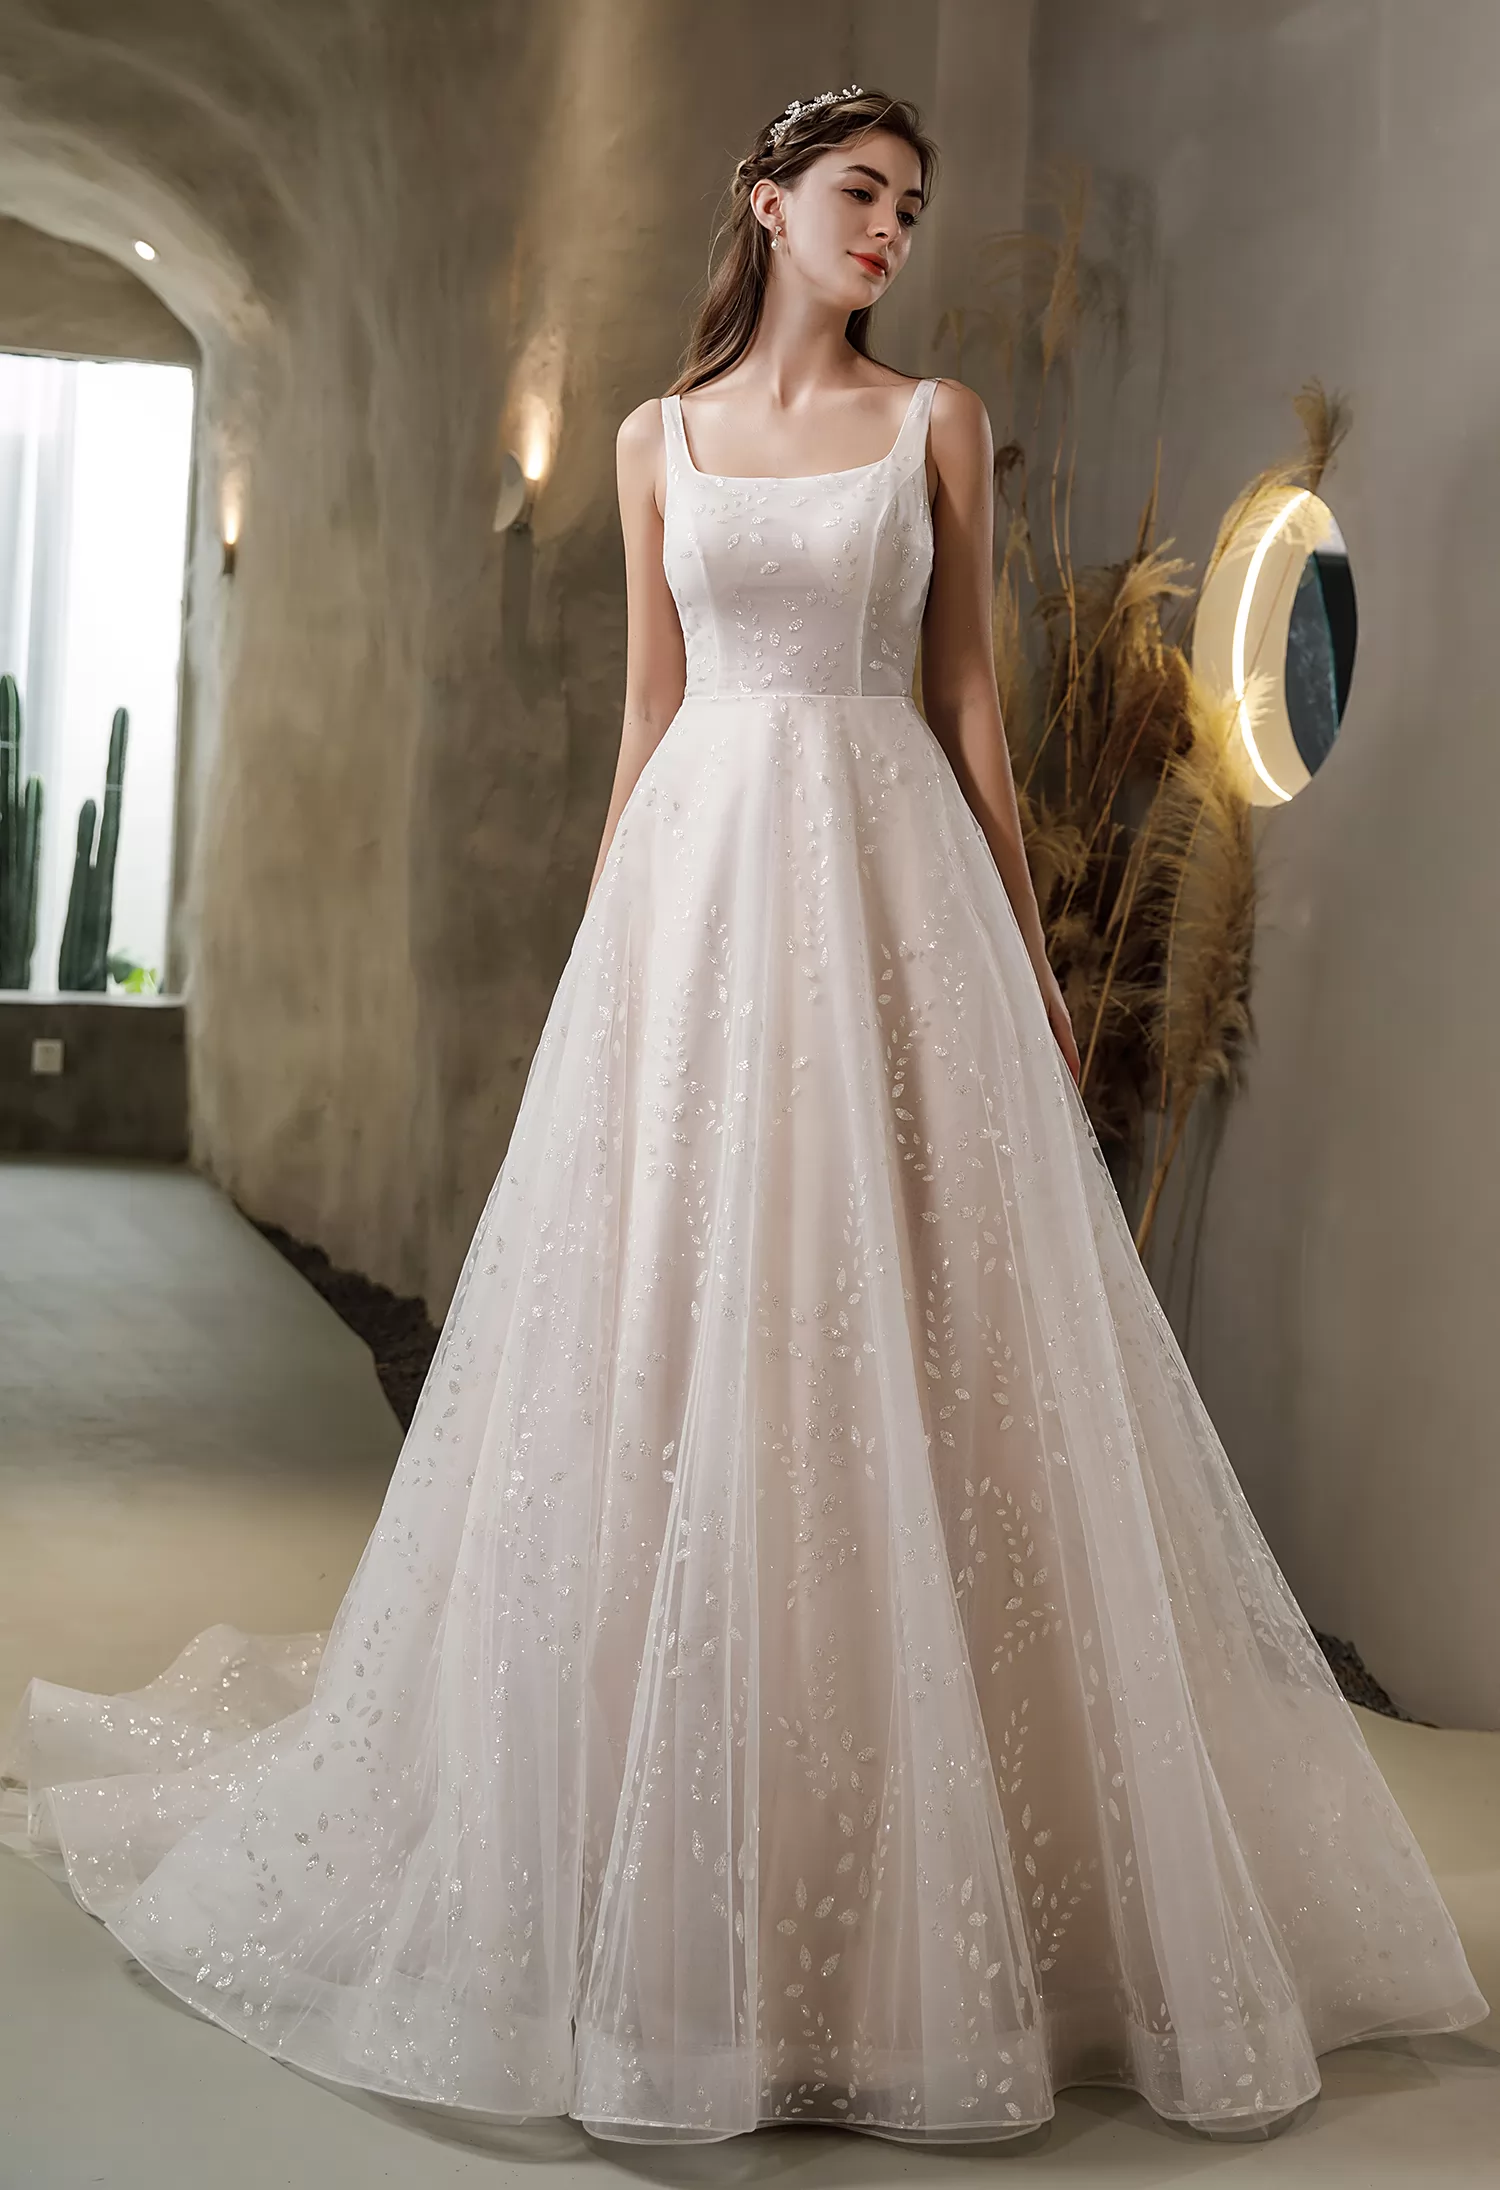 Elegant Princess-Cut Gown with Tulle and Lace Skirt